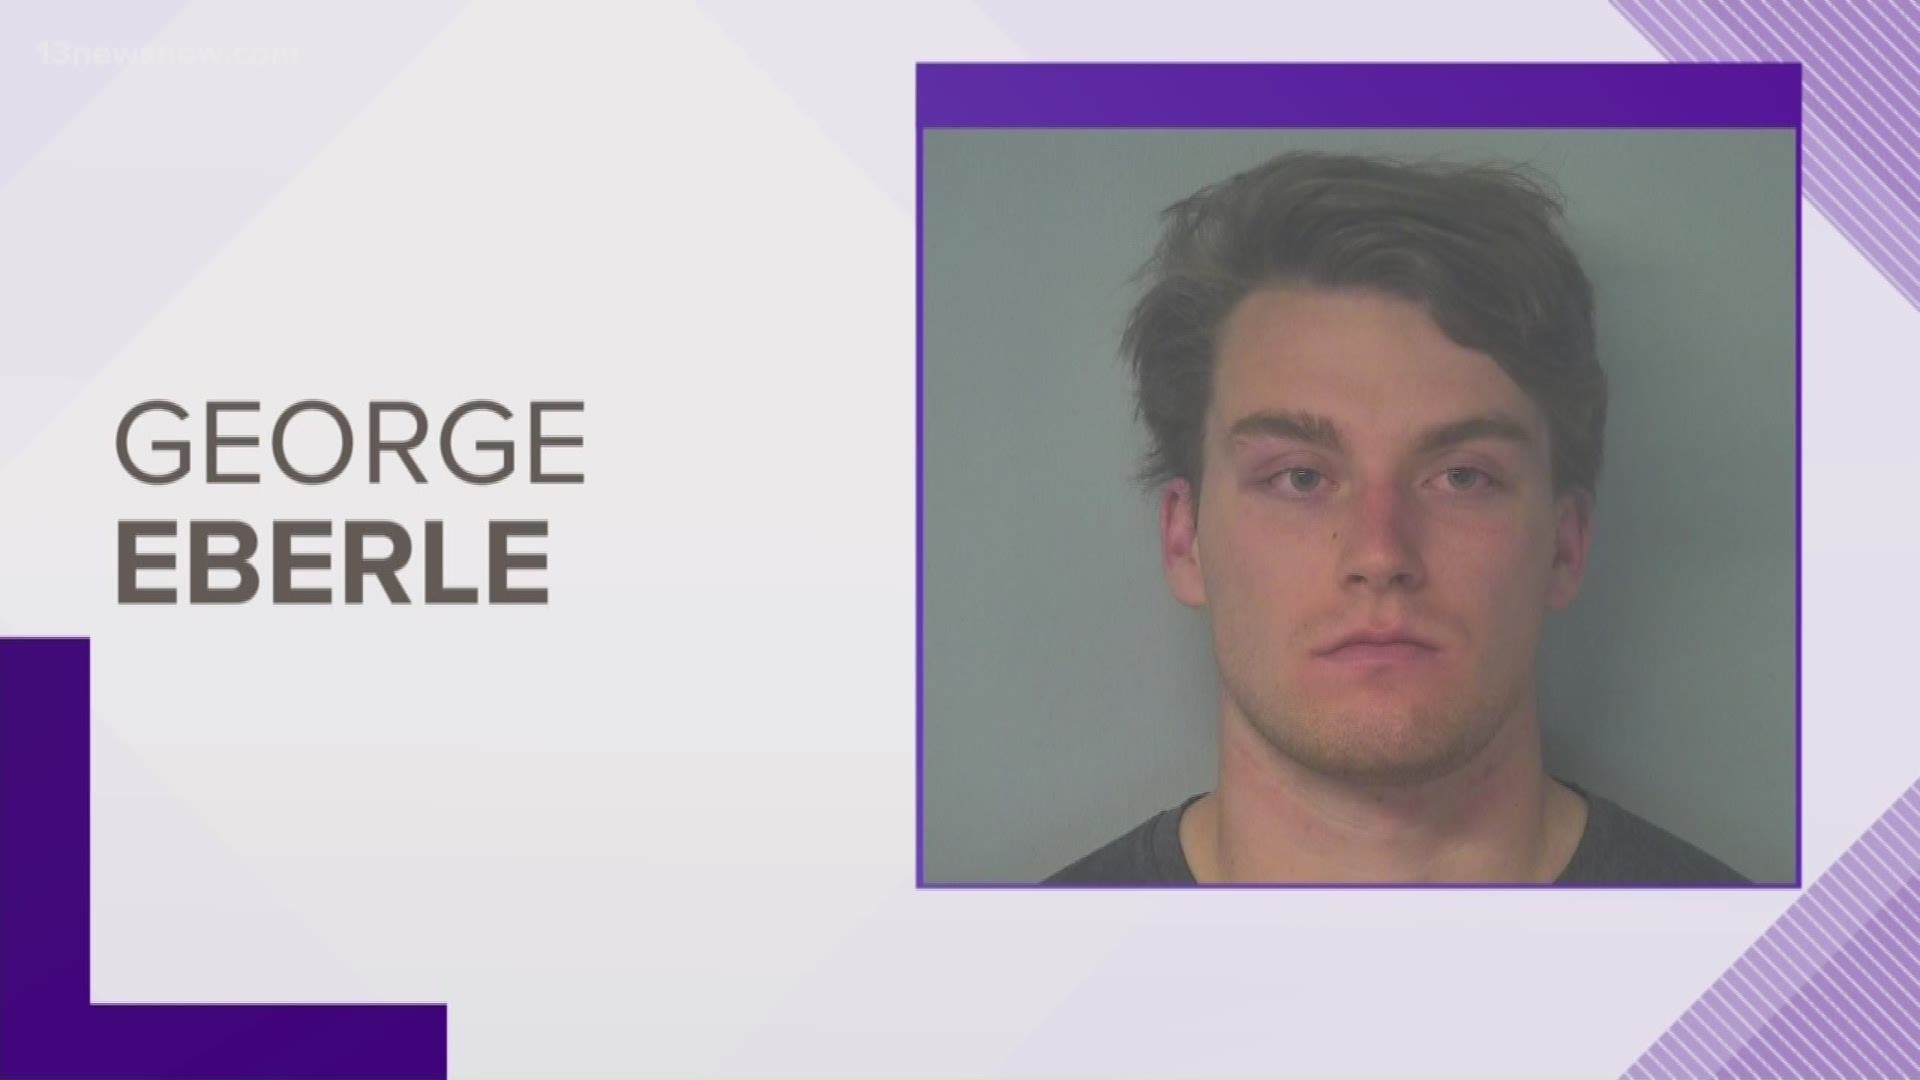 George Eberle is a sophomore kicker and punter for  The Tribe at William & Mary. Williamsburg police said he broke into a home and sexually abused someone.